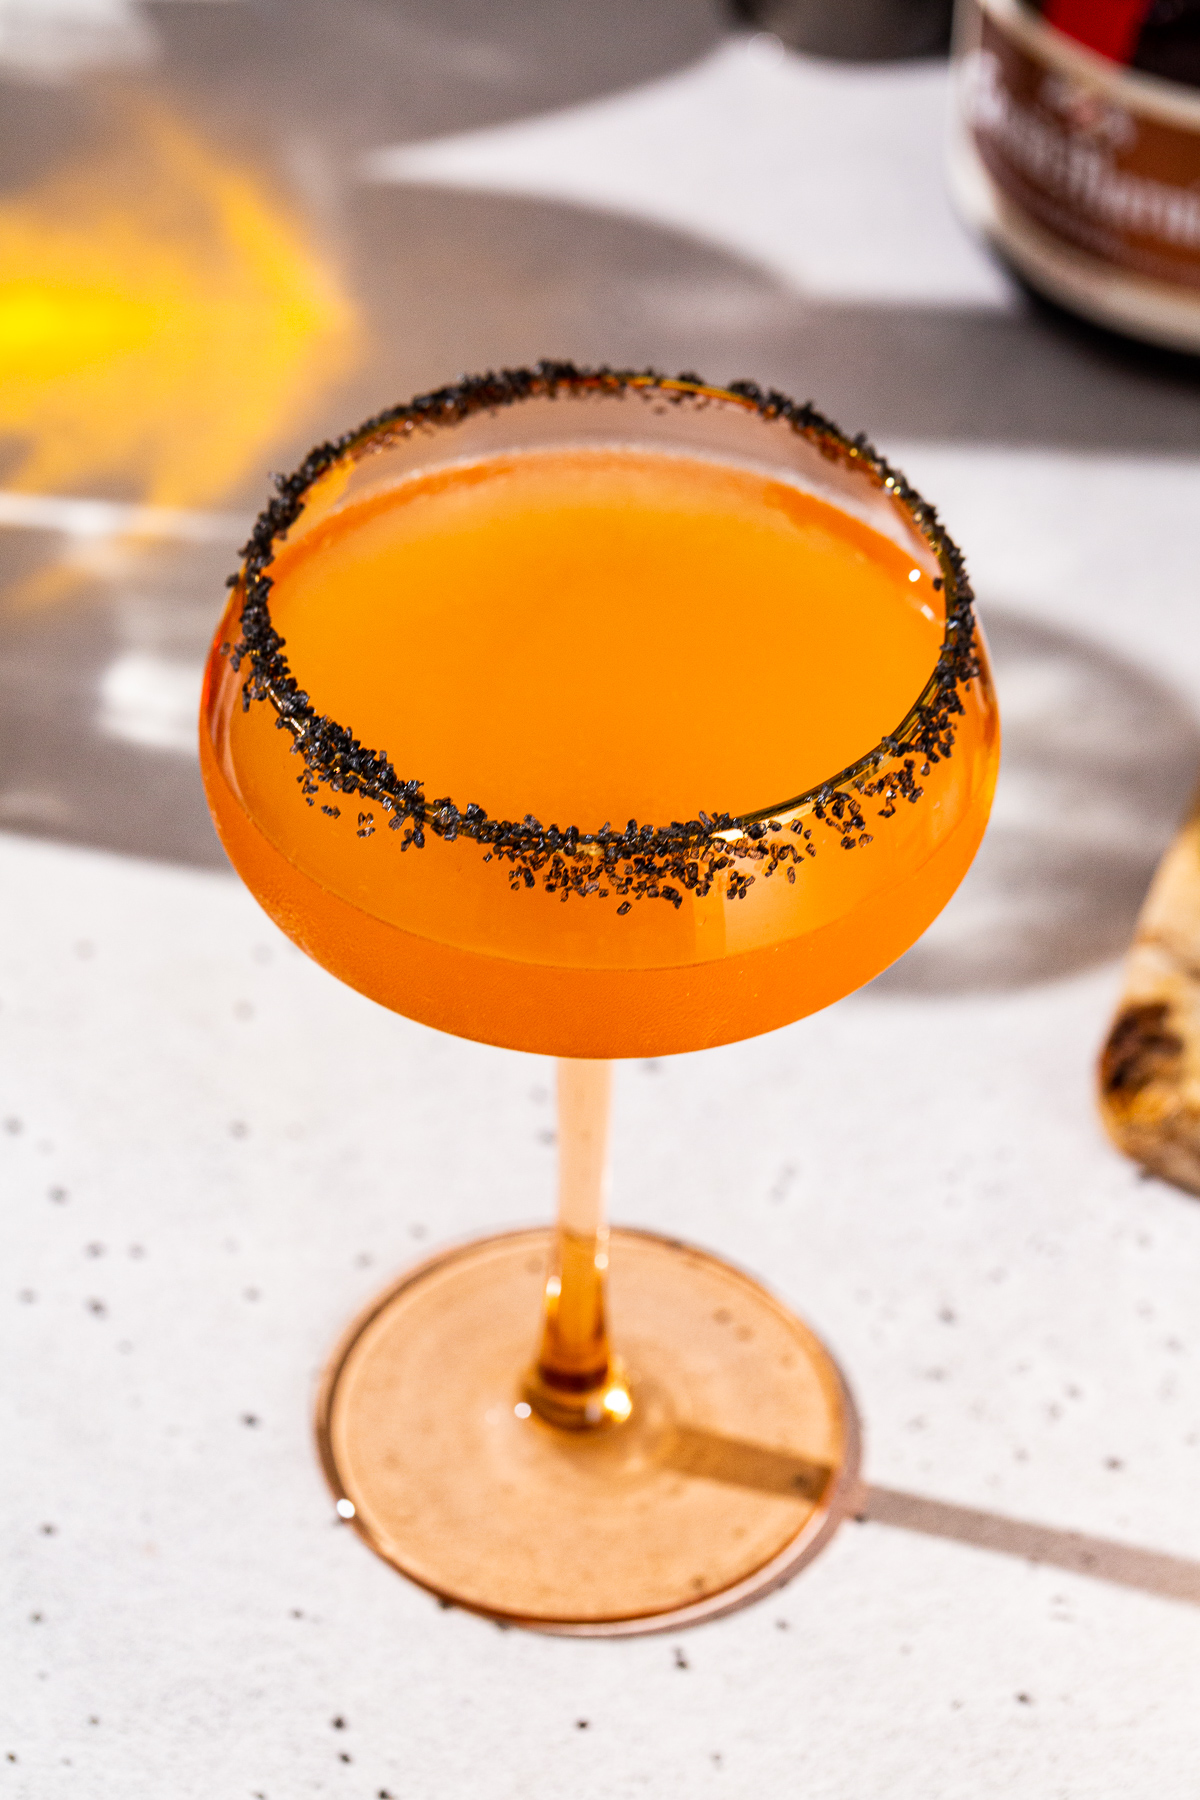 Overhead view of a Halloween Margarita. The drink is in an orange tinted coupe glass and has a black lava salt rim. Grand Marnier is seen in the background.